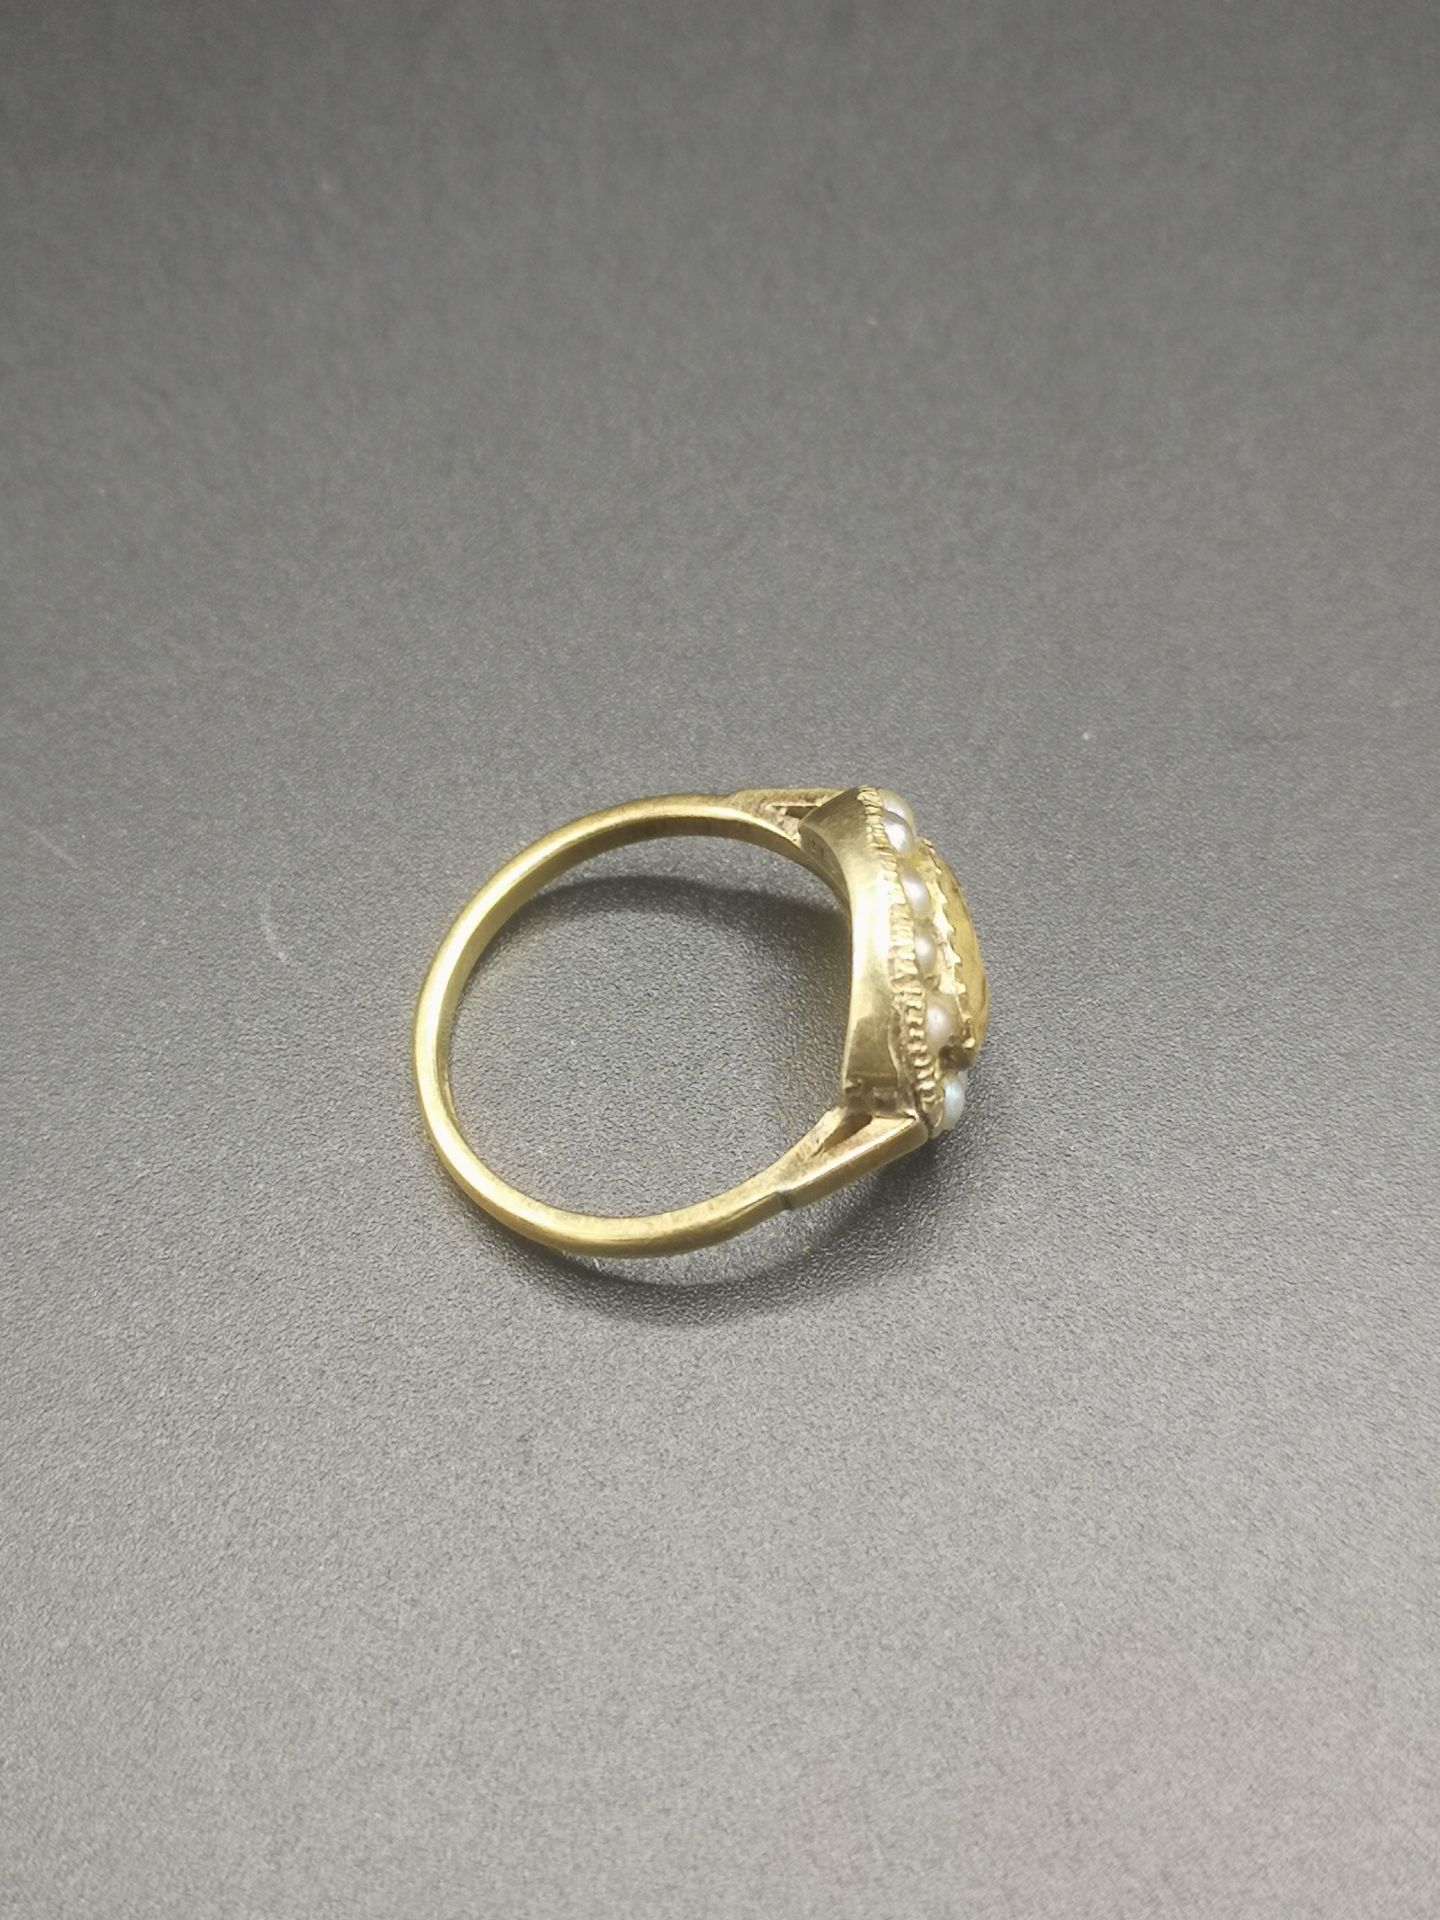 19th century, 18ct gold mourning ring - Image 4 of 5